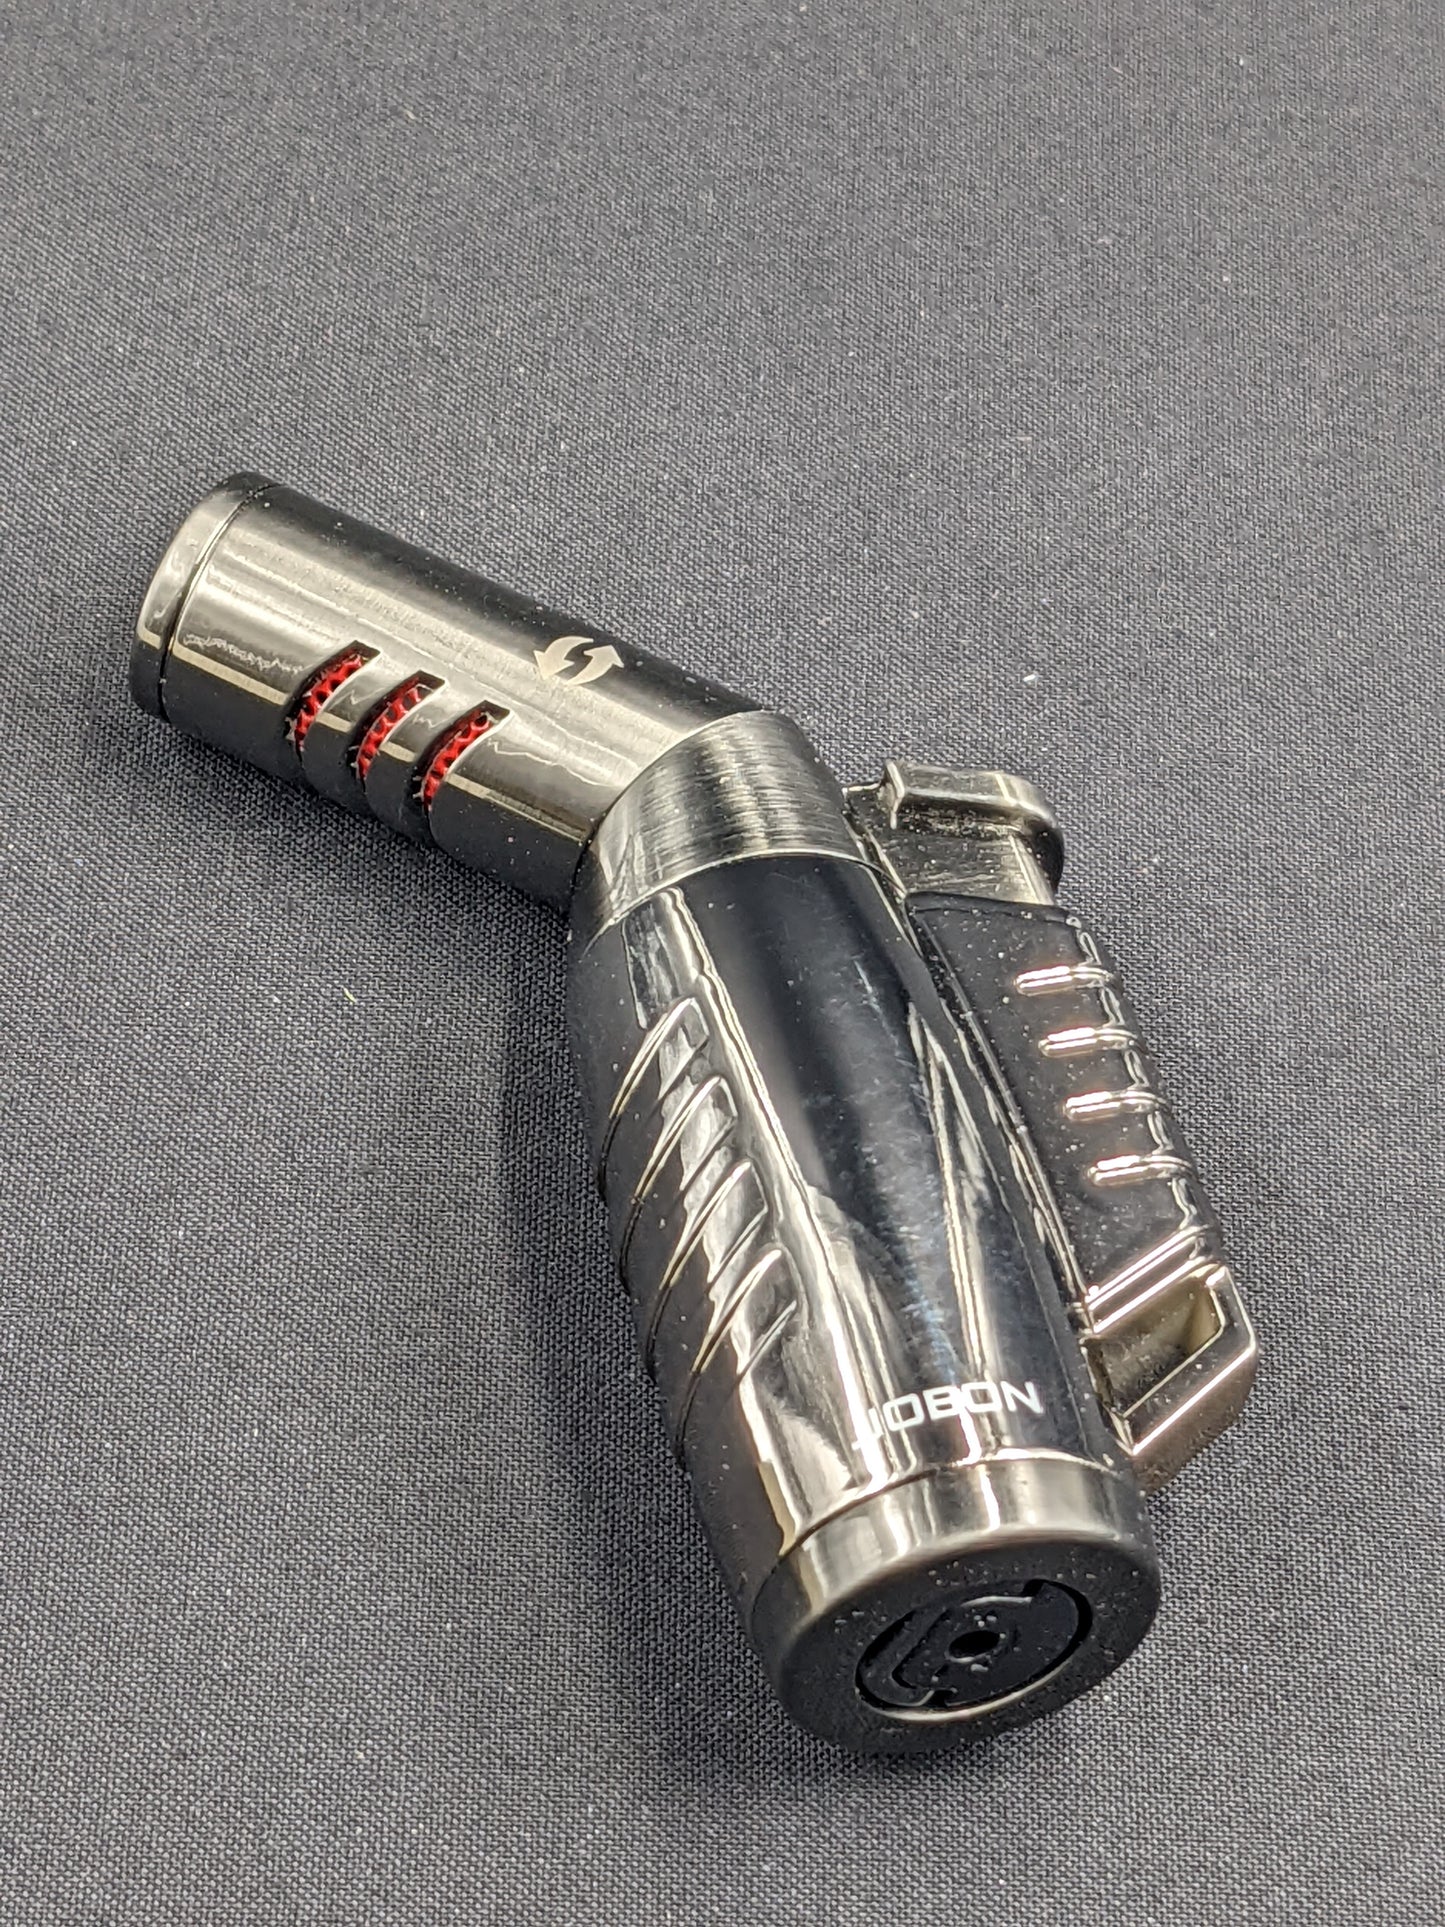 Jobon 3 Jet Torch Butane Lighter with Adjustable Nozzle - Silver